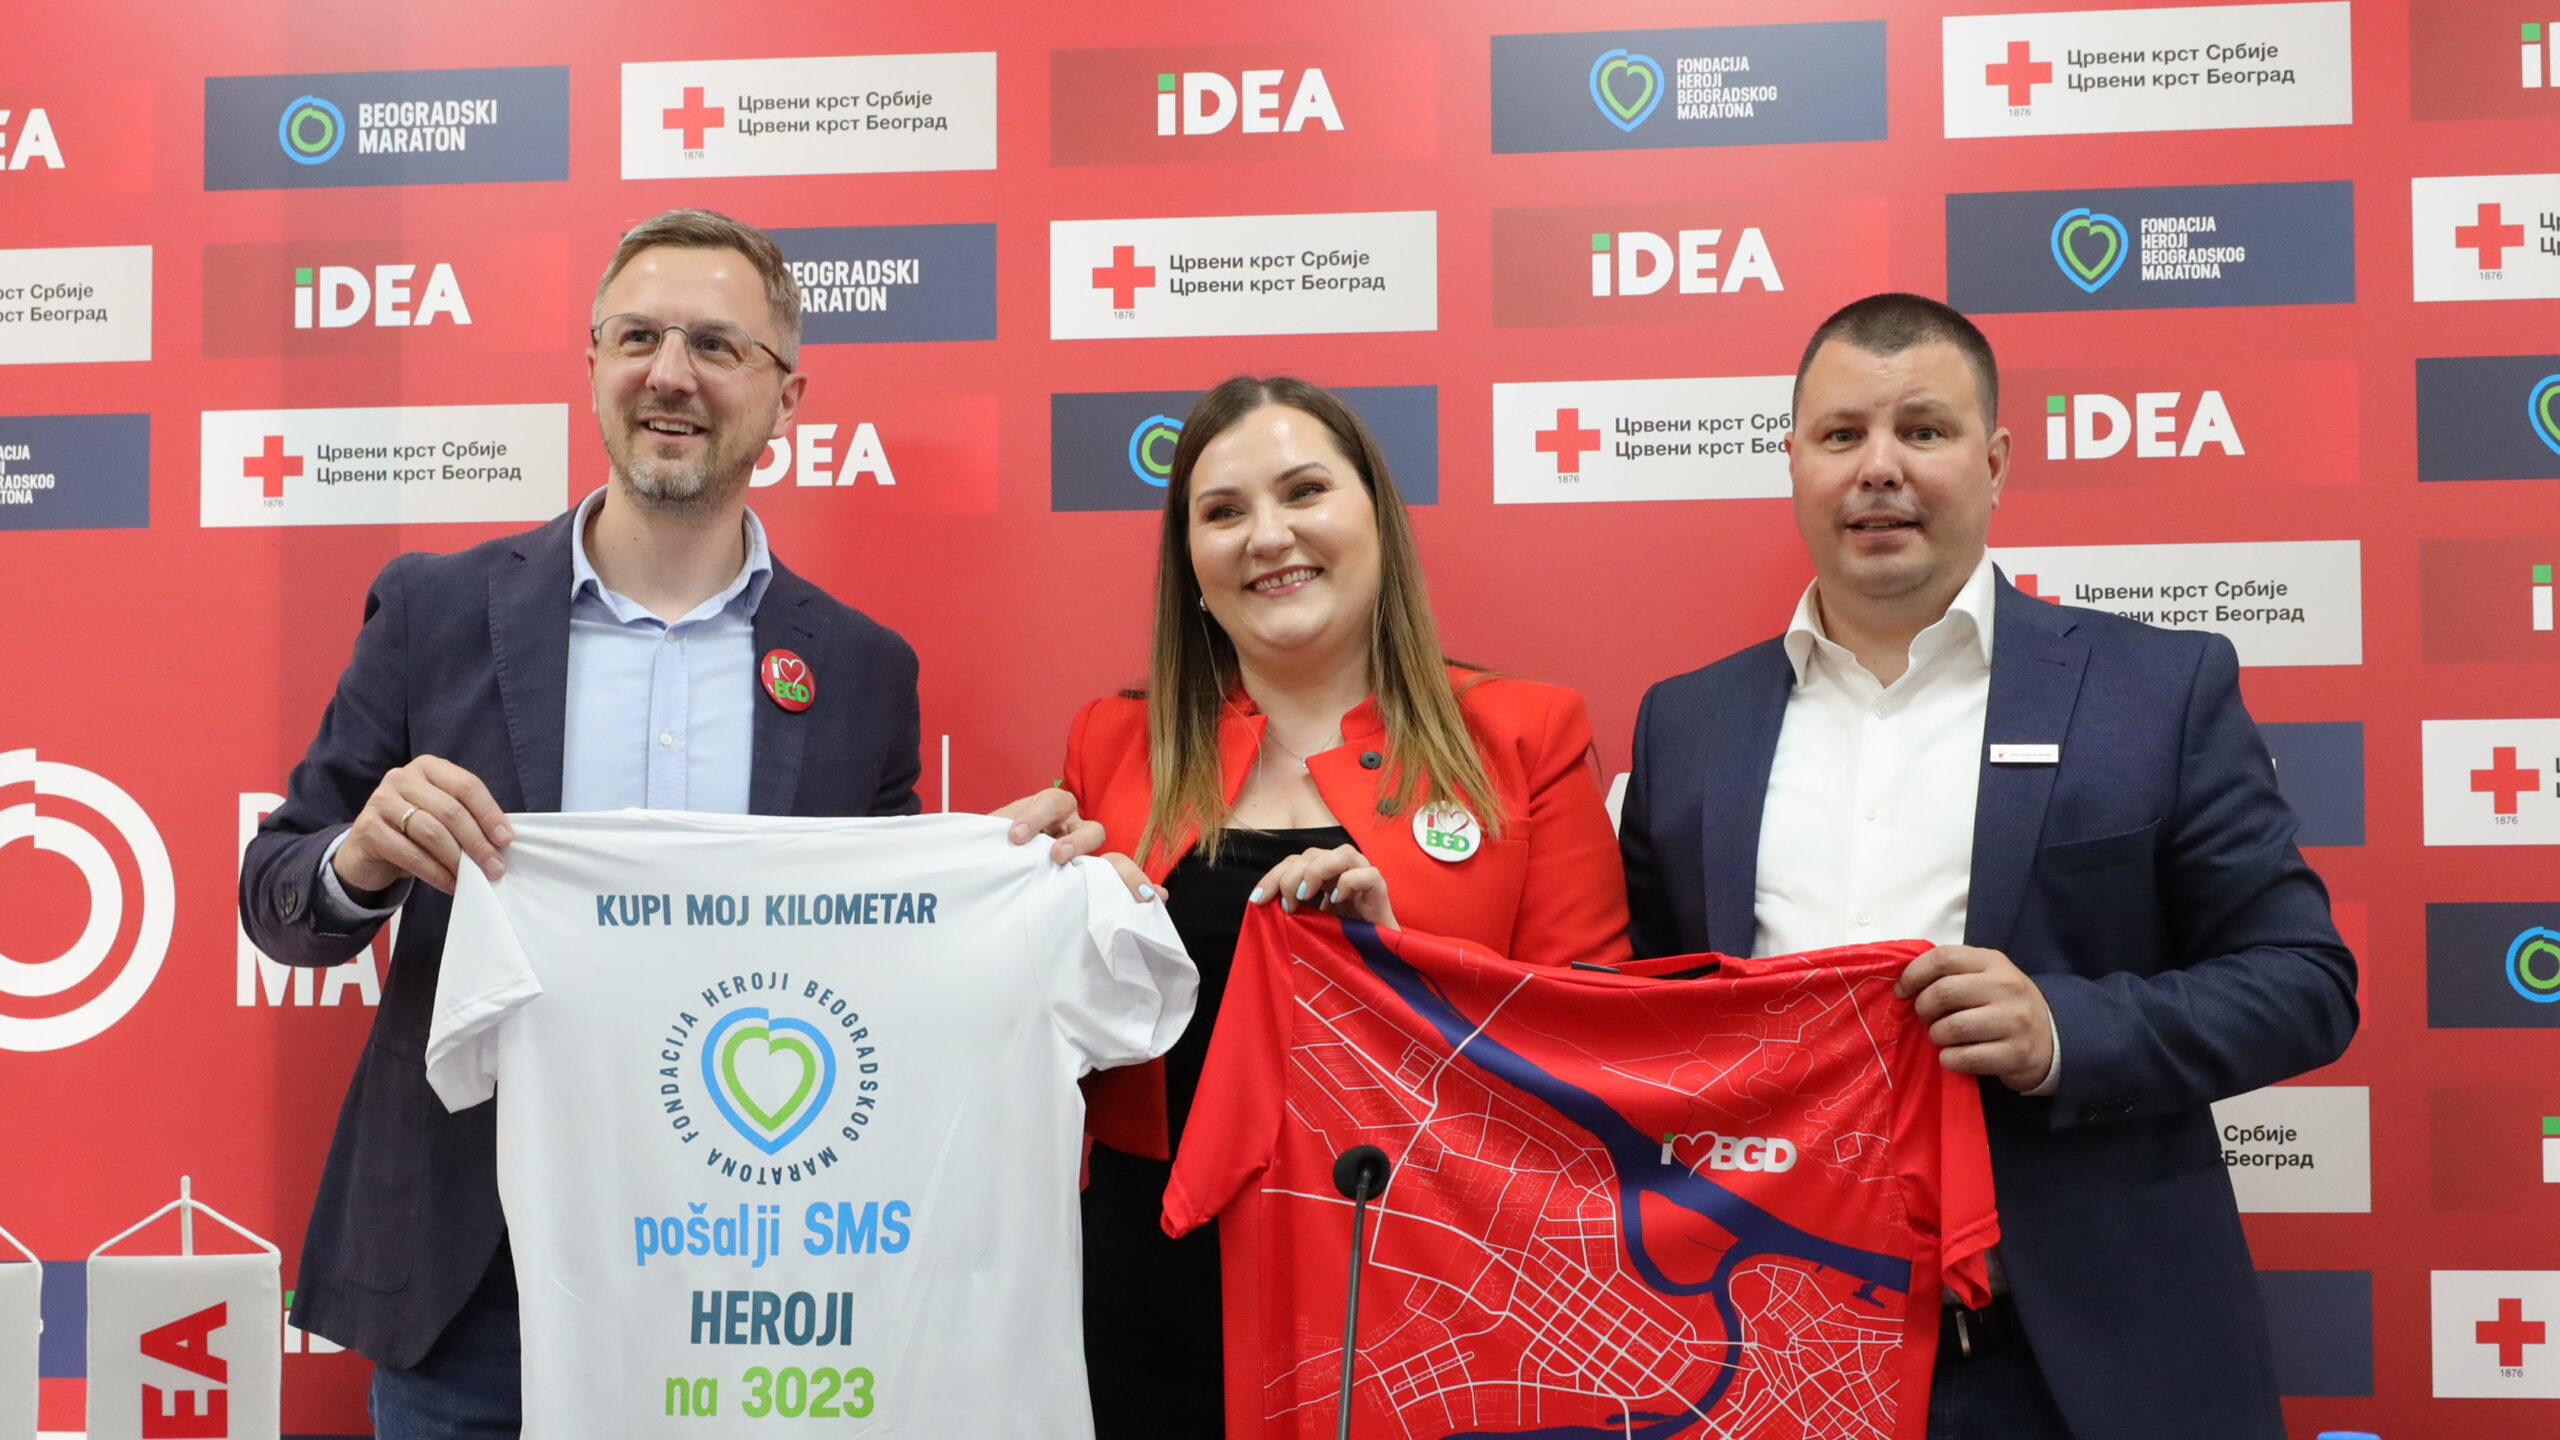 Donation of AED (Automated External Defibrillator) devices to the Red Cross Belgrade